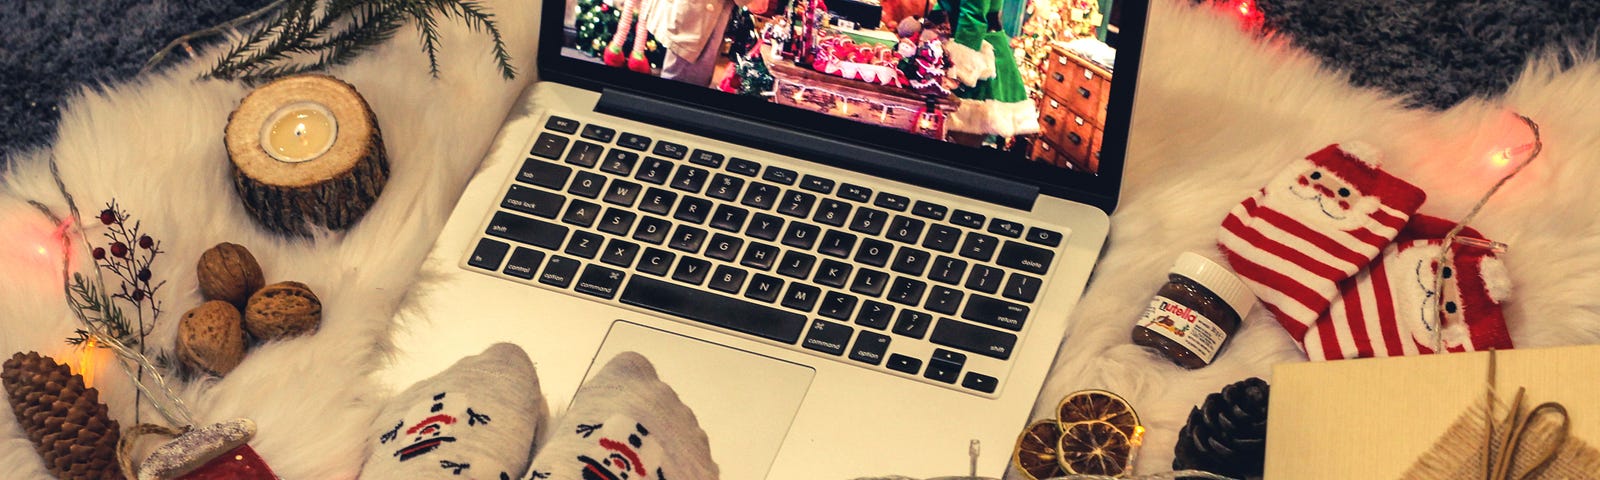 Laptop showing a Christmas scene